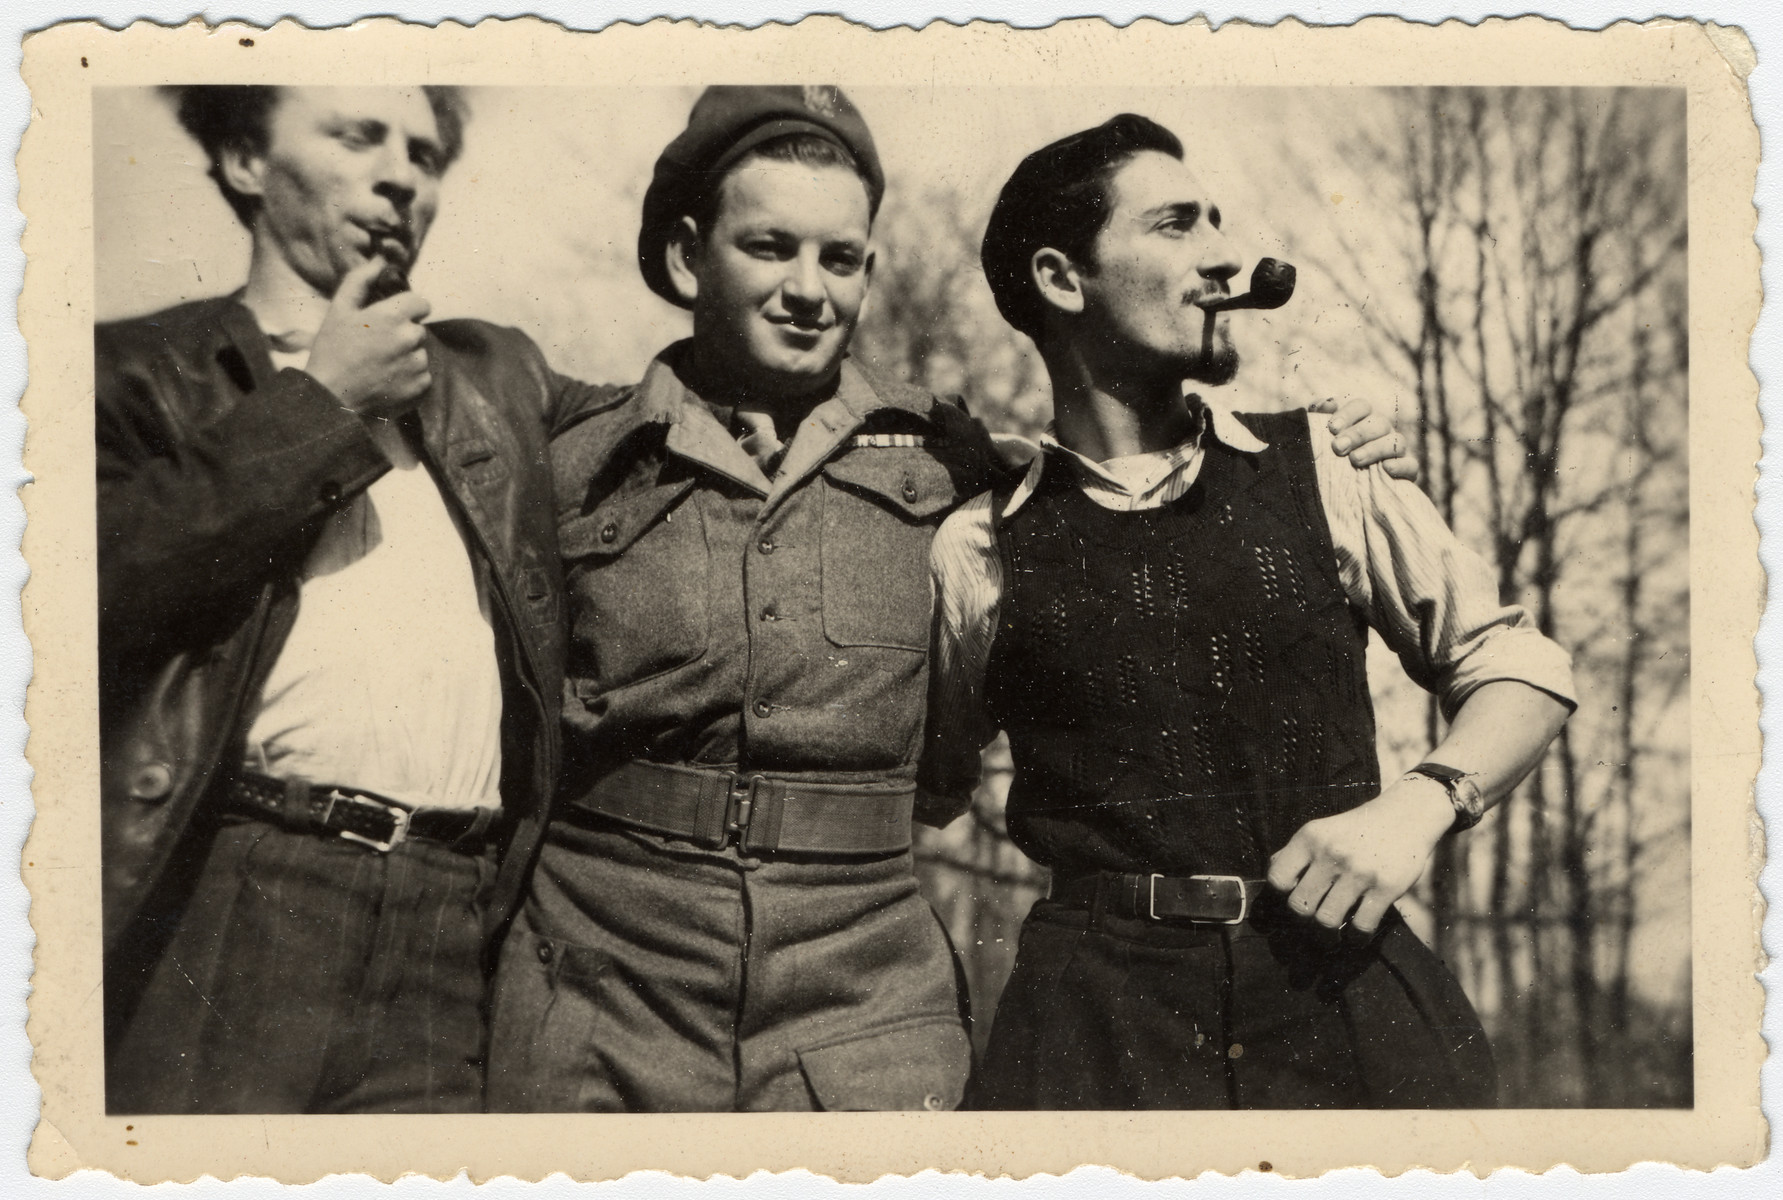 Close-up portrait of three young Israeli men smoking pipes.

Pictured on the right is Jacques Sephiha.  The man in the center is a member of the Jewish Brigade.